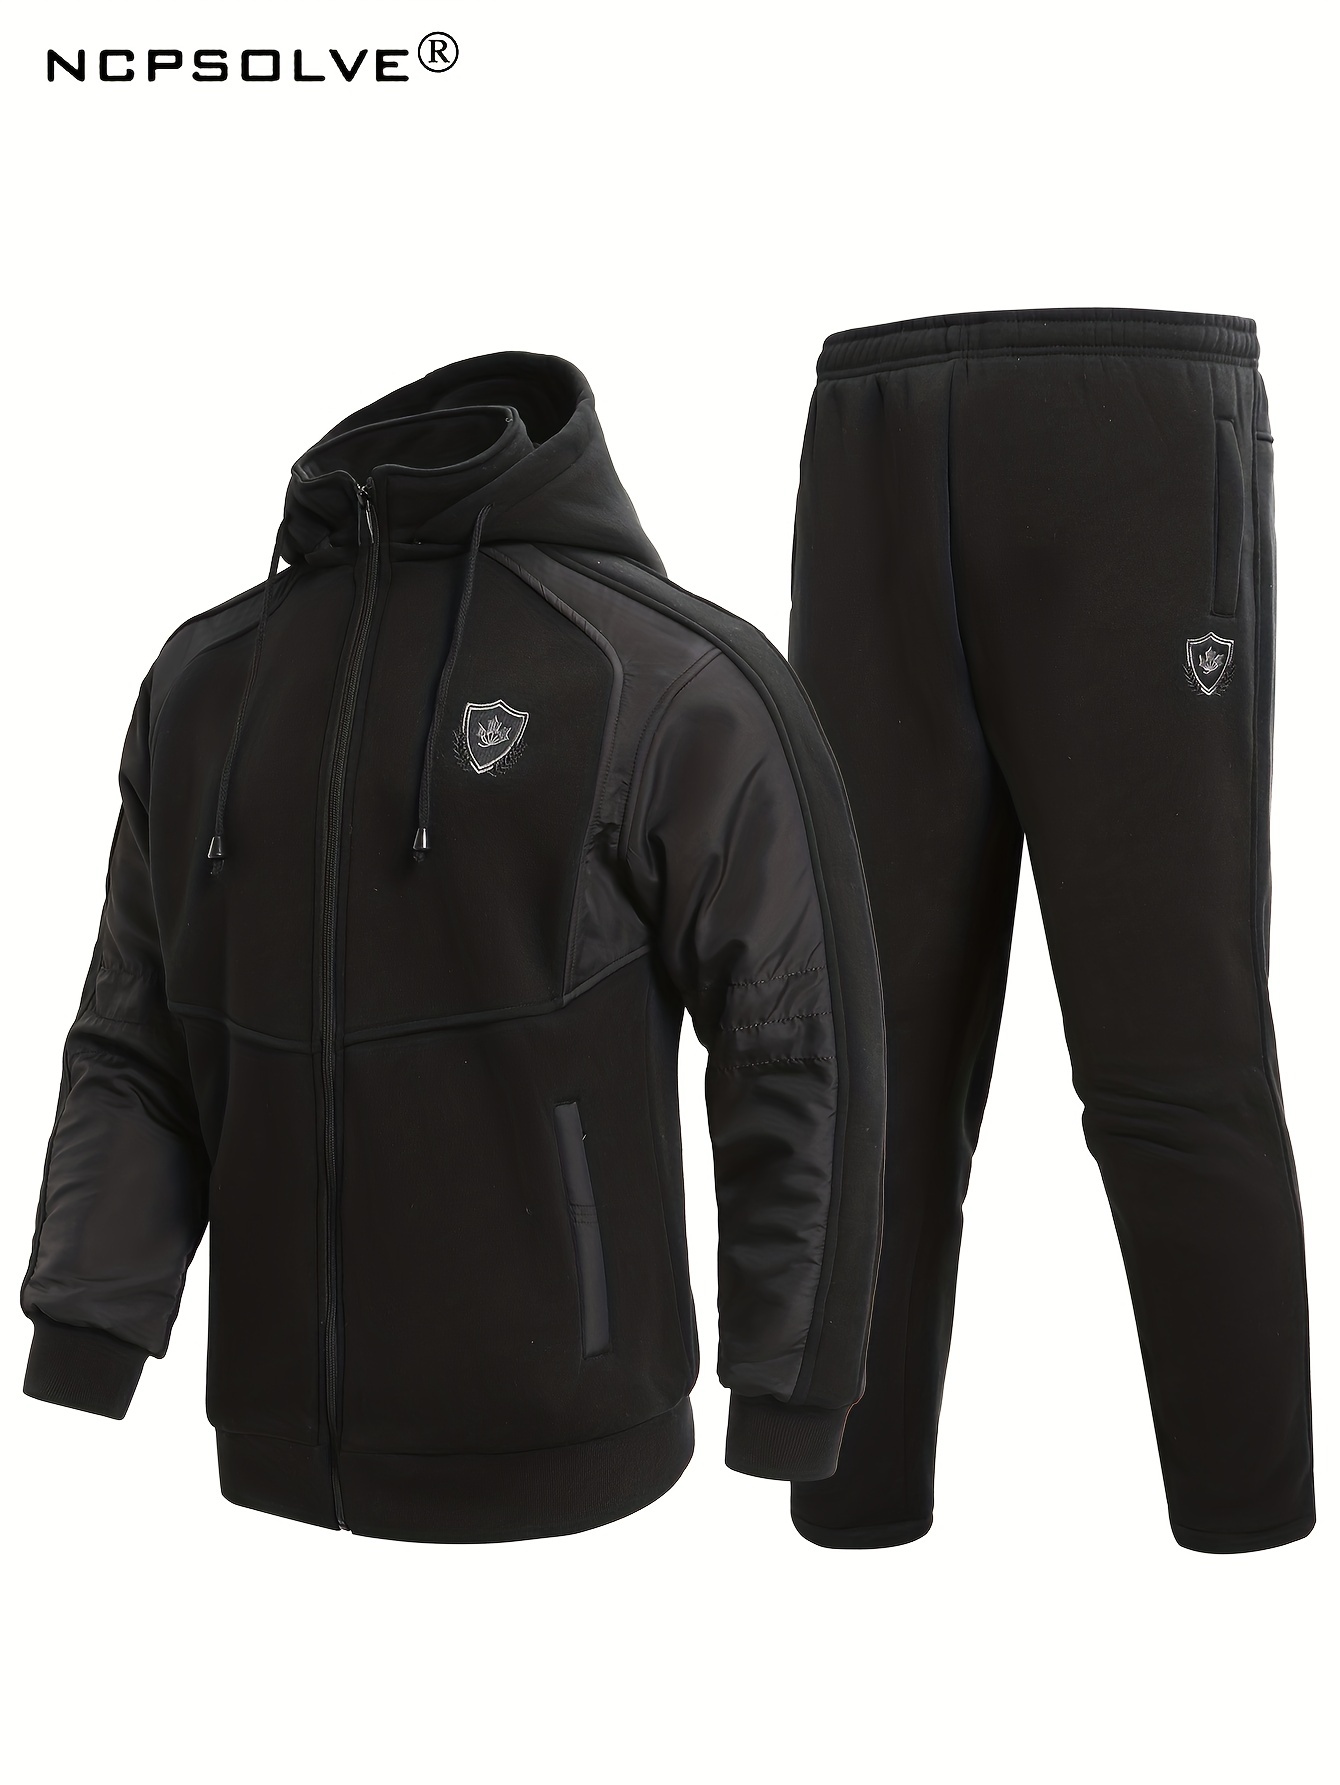 Men's Thermal Suit: Stay Warm & Fit in Style with Fleece Fitness Clothing!